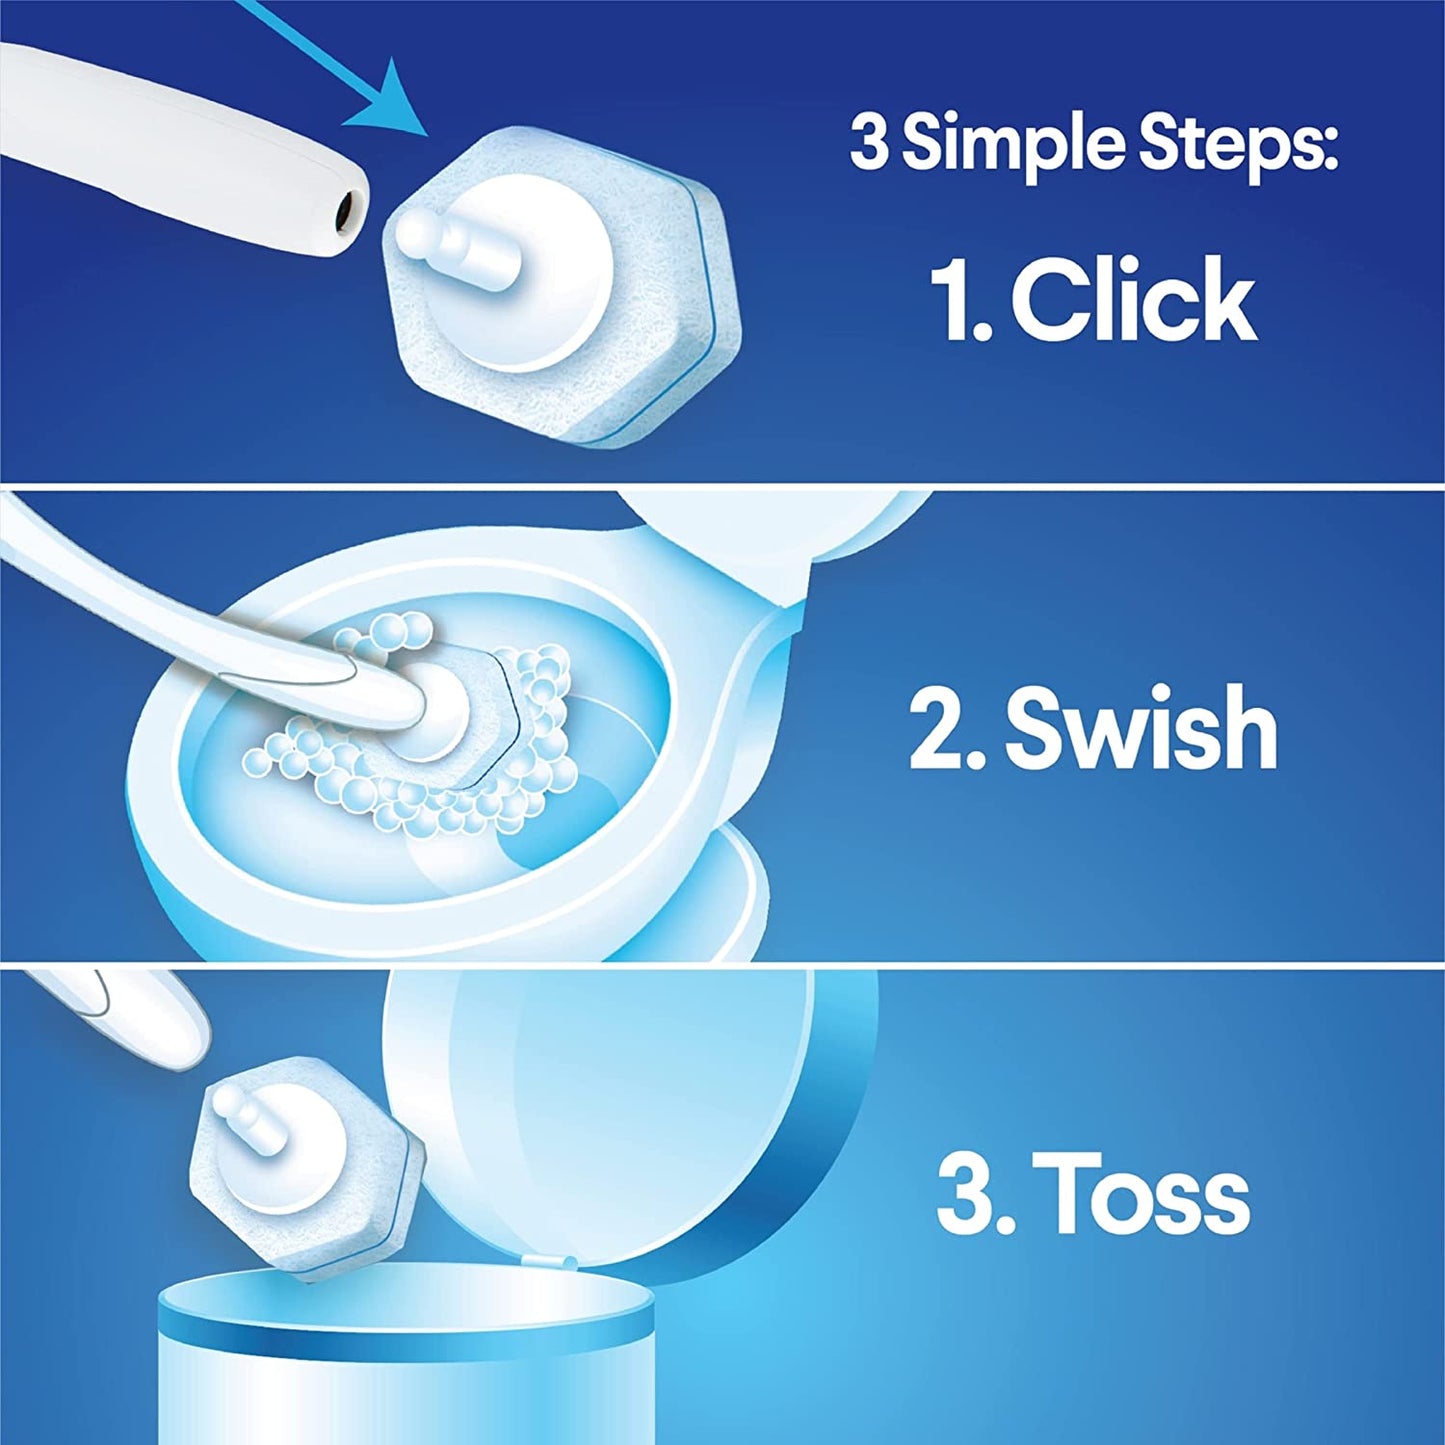 Disposable Toilet Cleaning System and 6 Refill Heads